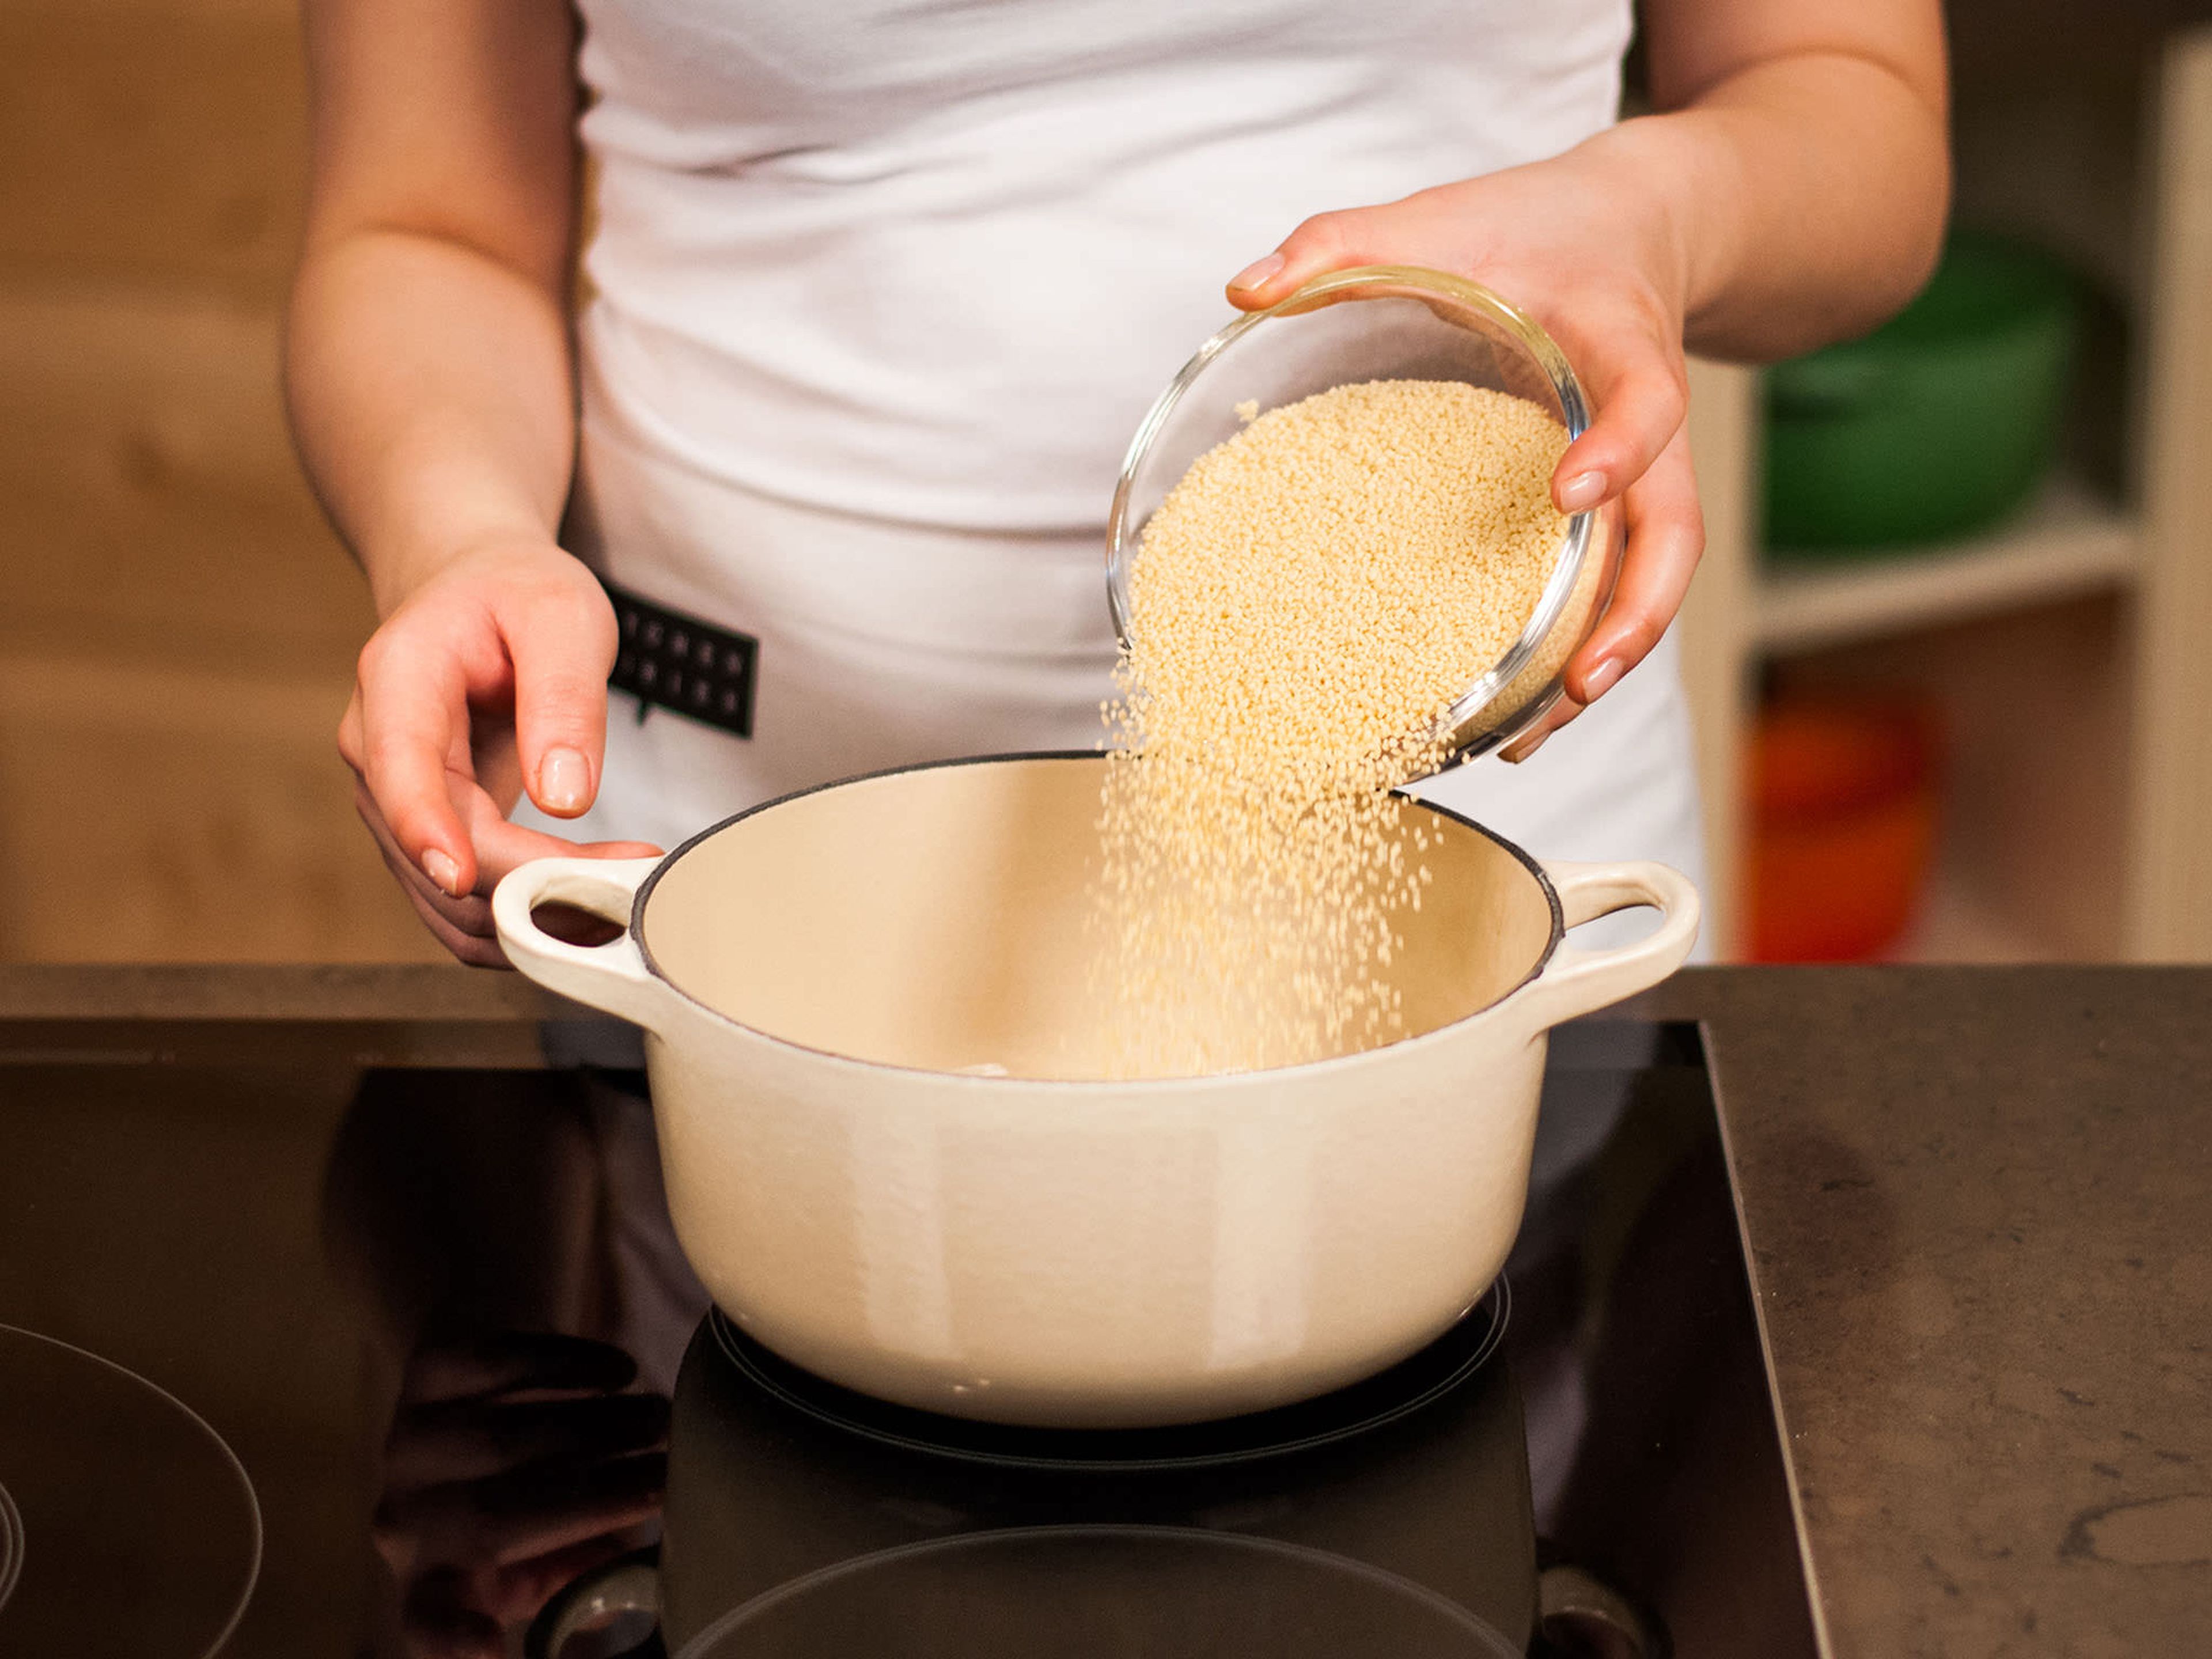 Allow couscous to stand and cook in boiled water according to package instructions and set aside.